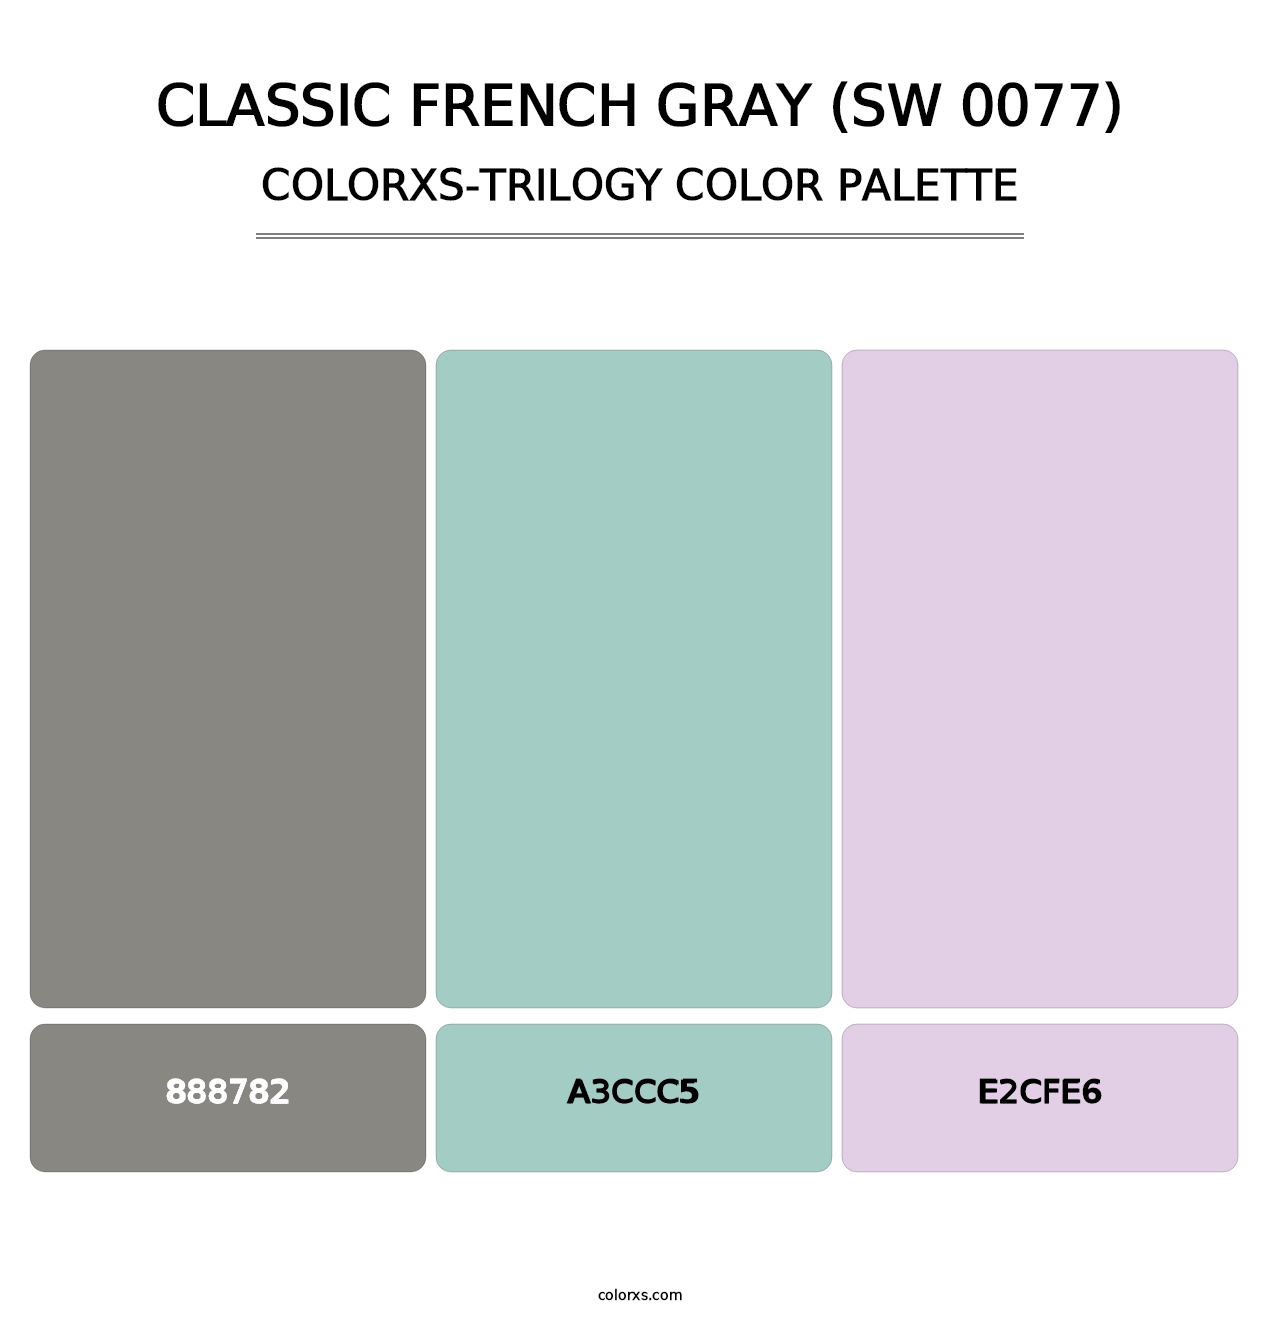 Classic French Gray (SW 0077) - Colorxs Trilogy Palette